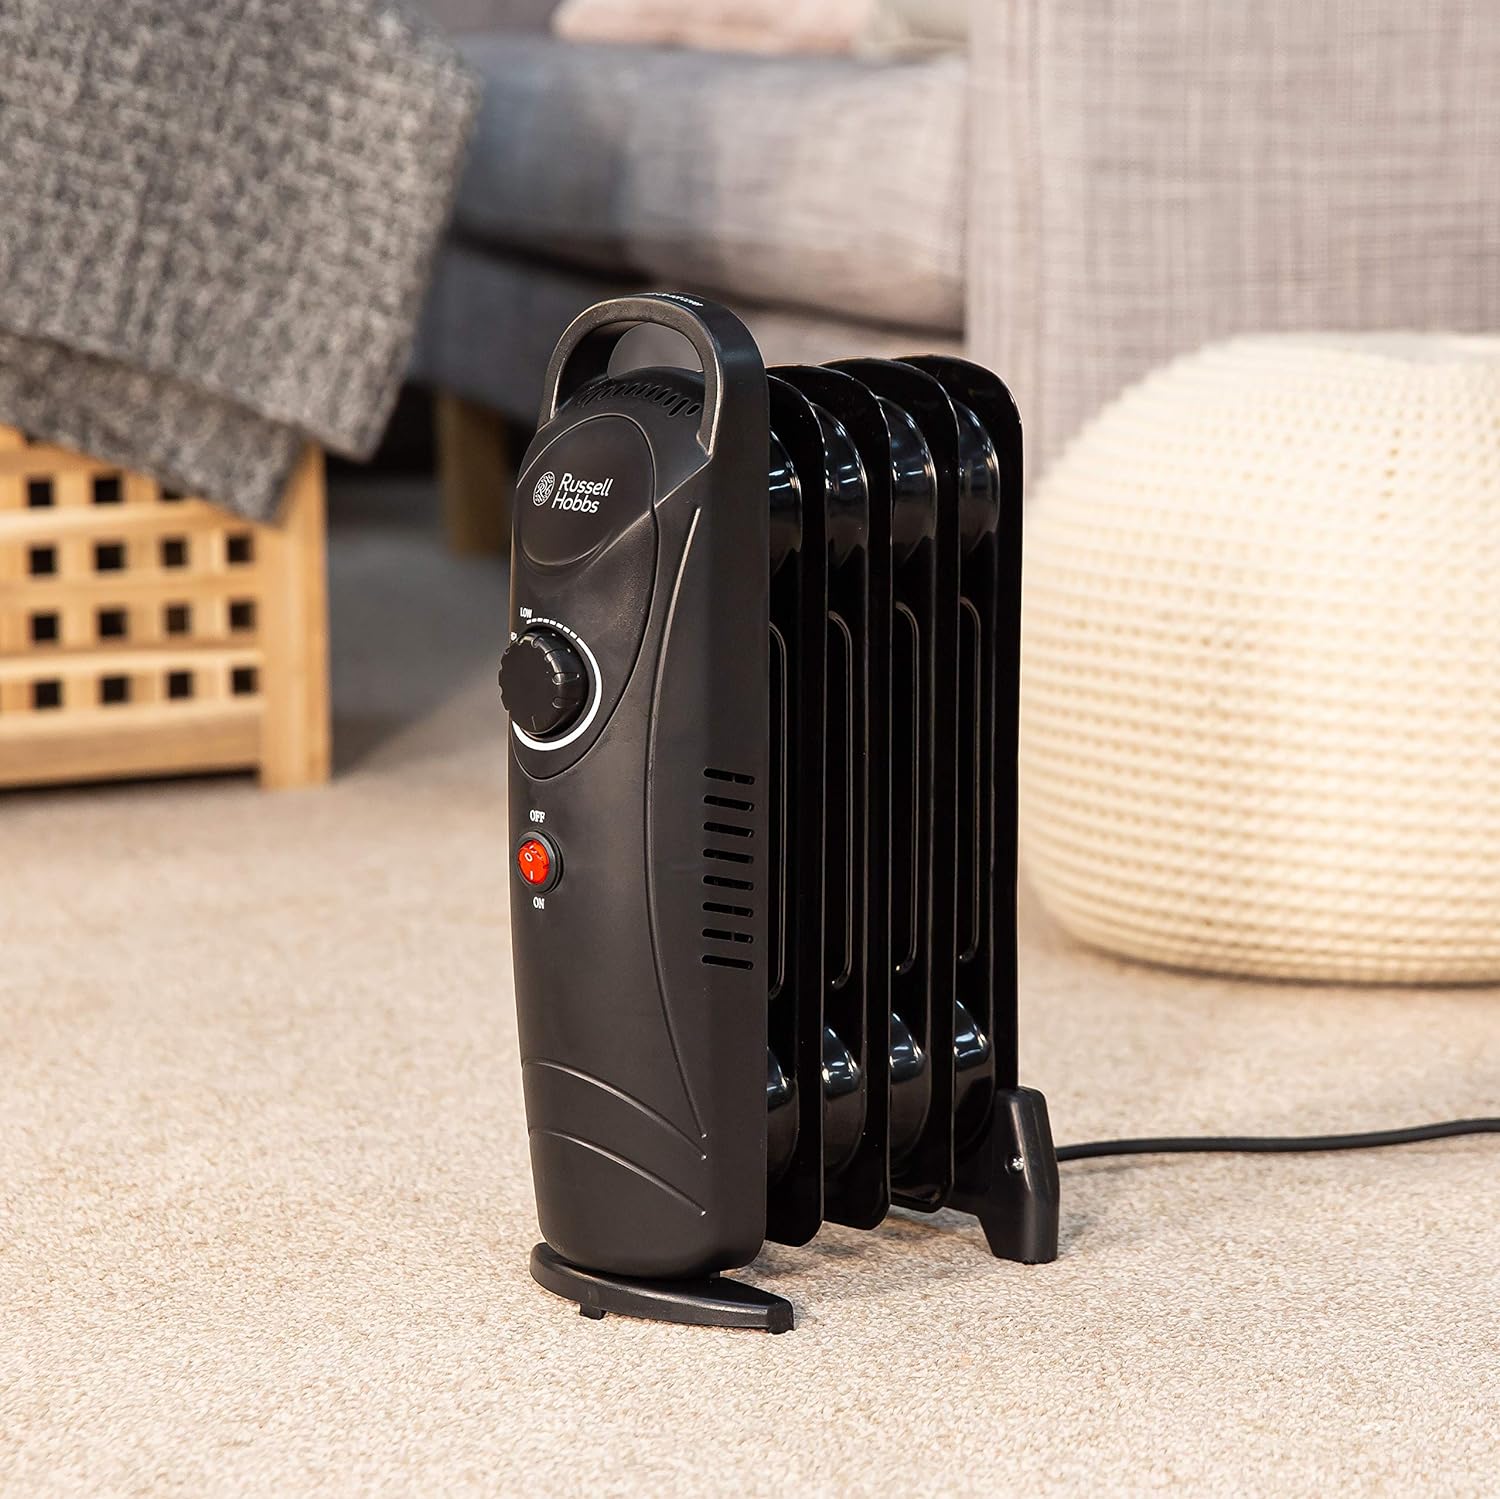 Russell Hobbs 650W Oil Filled Radiator, 5 Fin Portable Electric Heater - Black, Adjustable Thermostat, Safety Cut-off, 10 m sq Room Size, RHOFR3001, 2 Year...